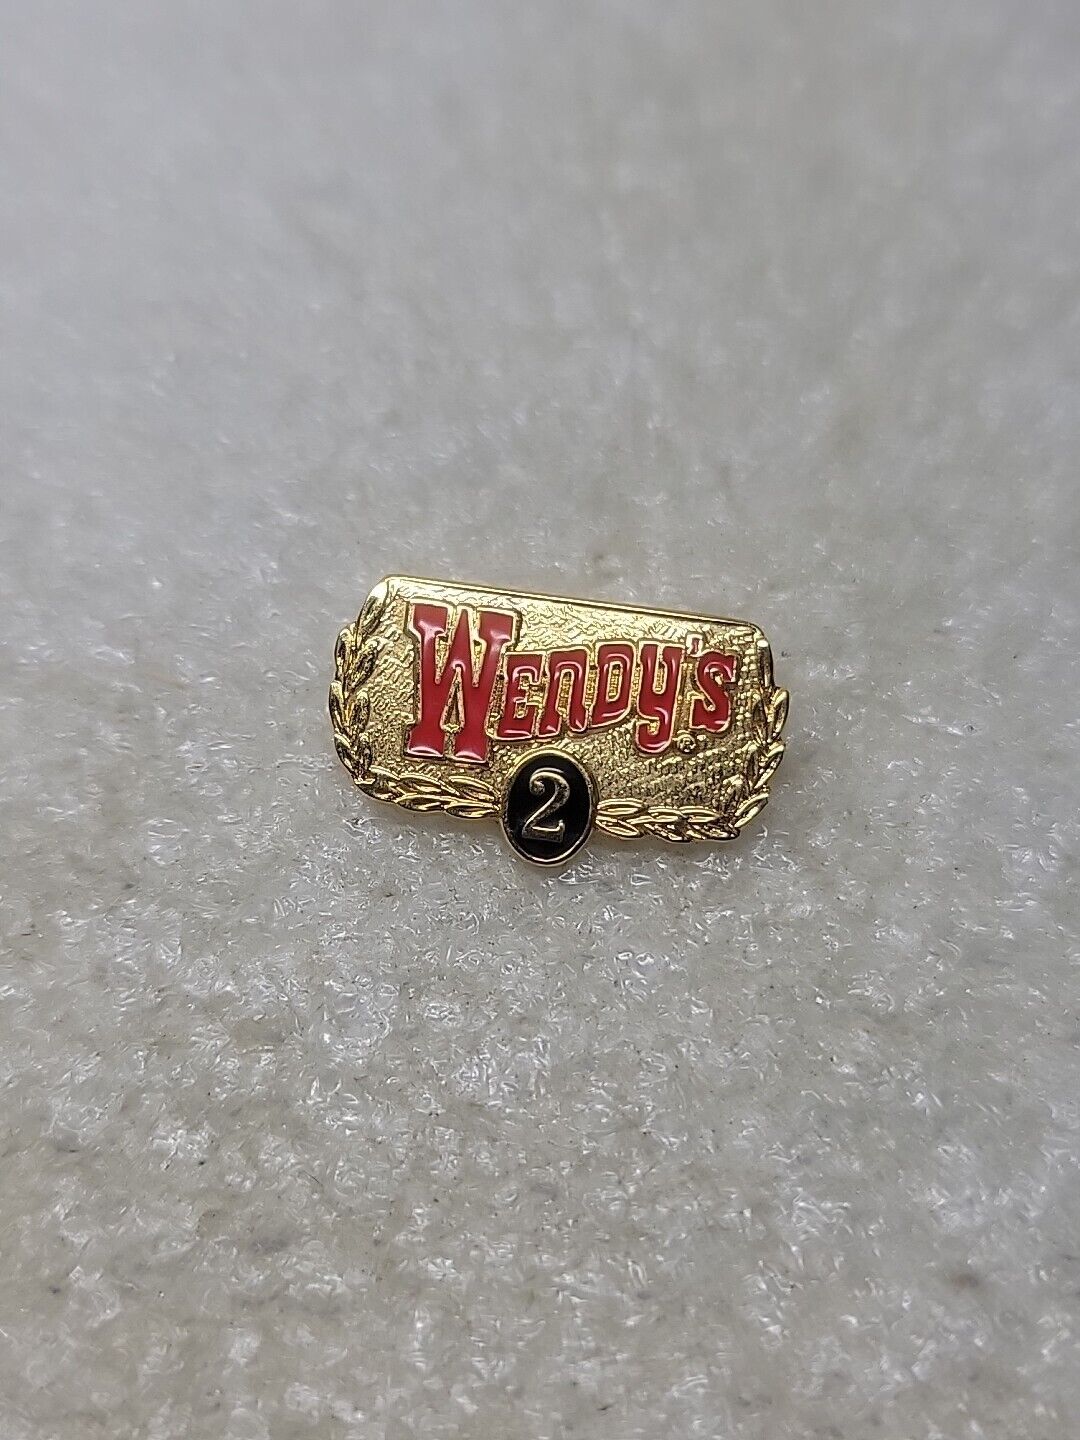 Wendy's 2 Year Anniversary Metal and Enamel Lapel Pin Gold Toned Clutch Back